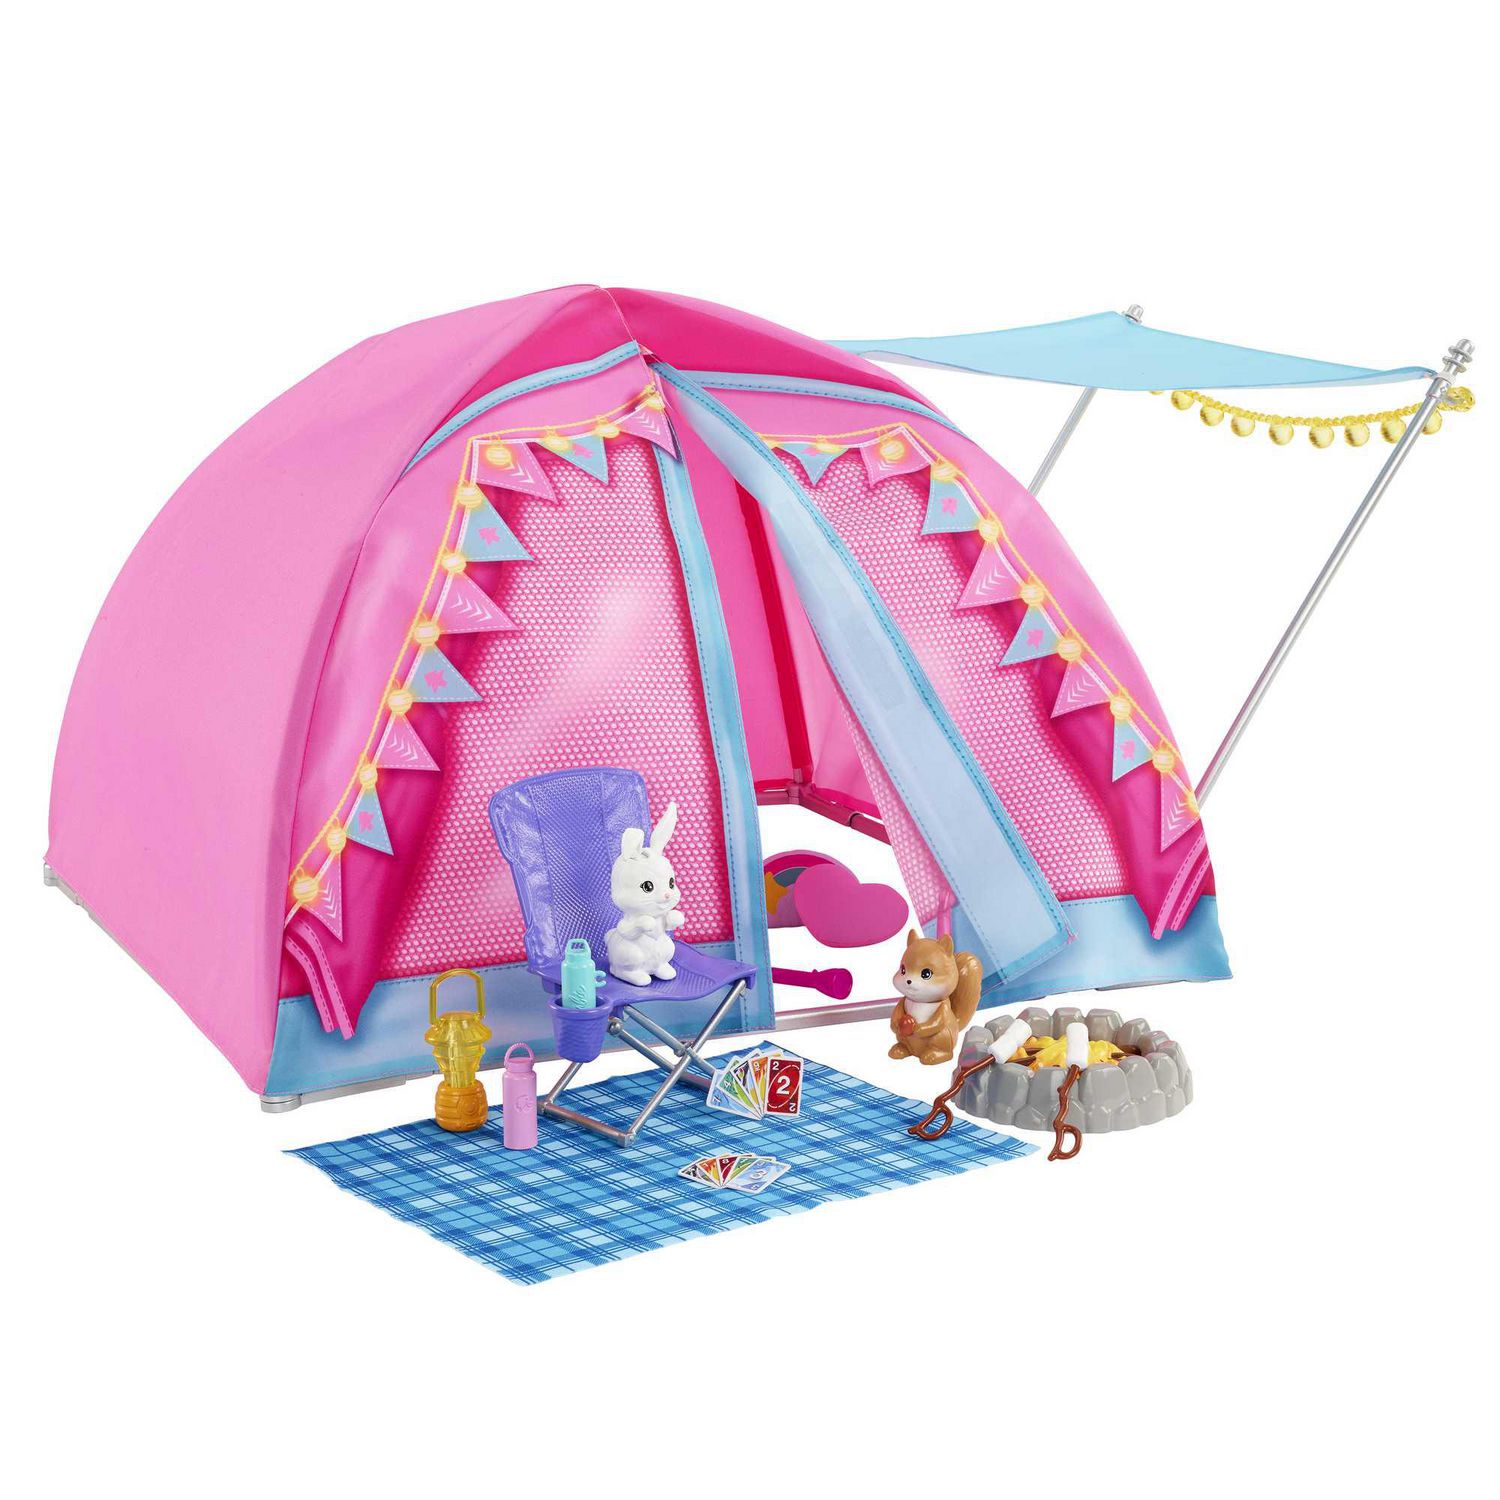 Barbie It Takes Two Camping Playset with Tent, 2 Barbie Dolls